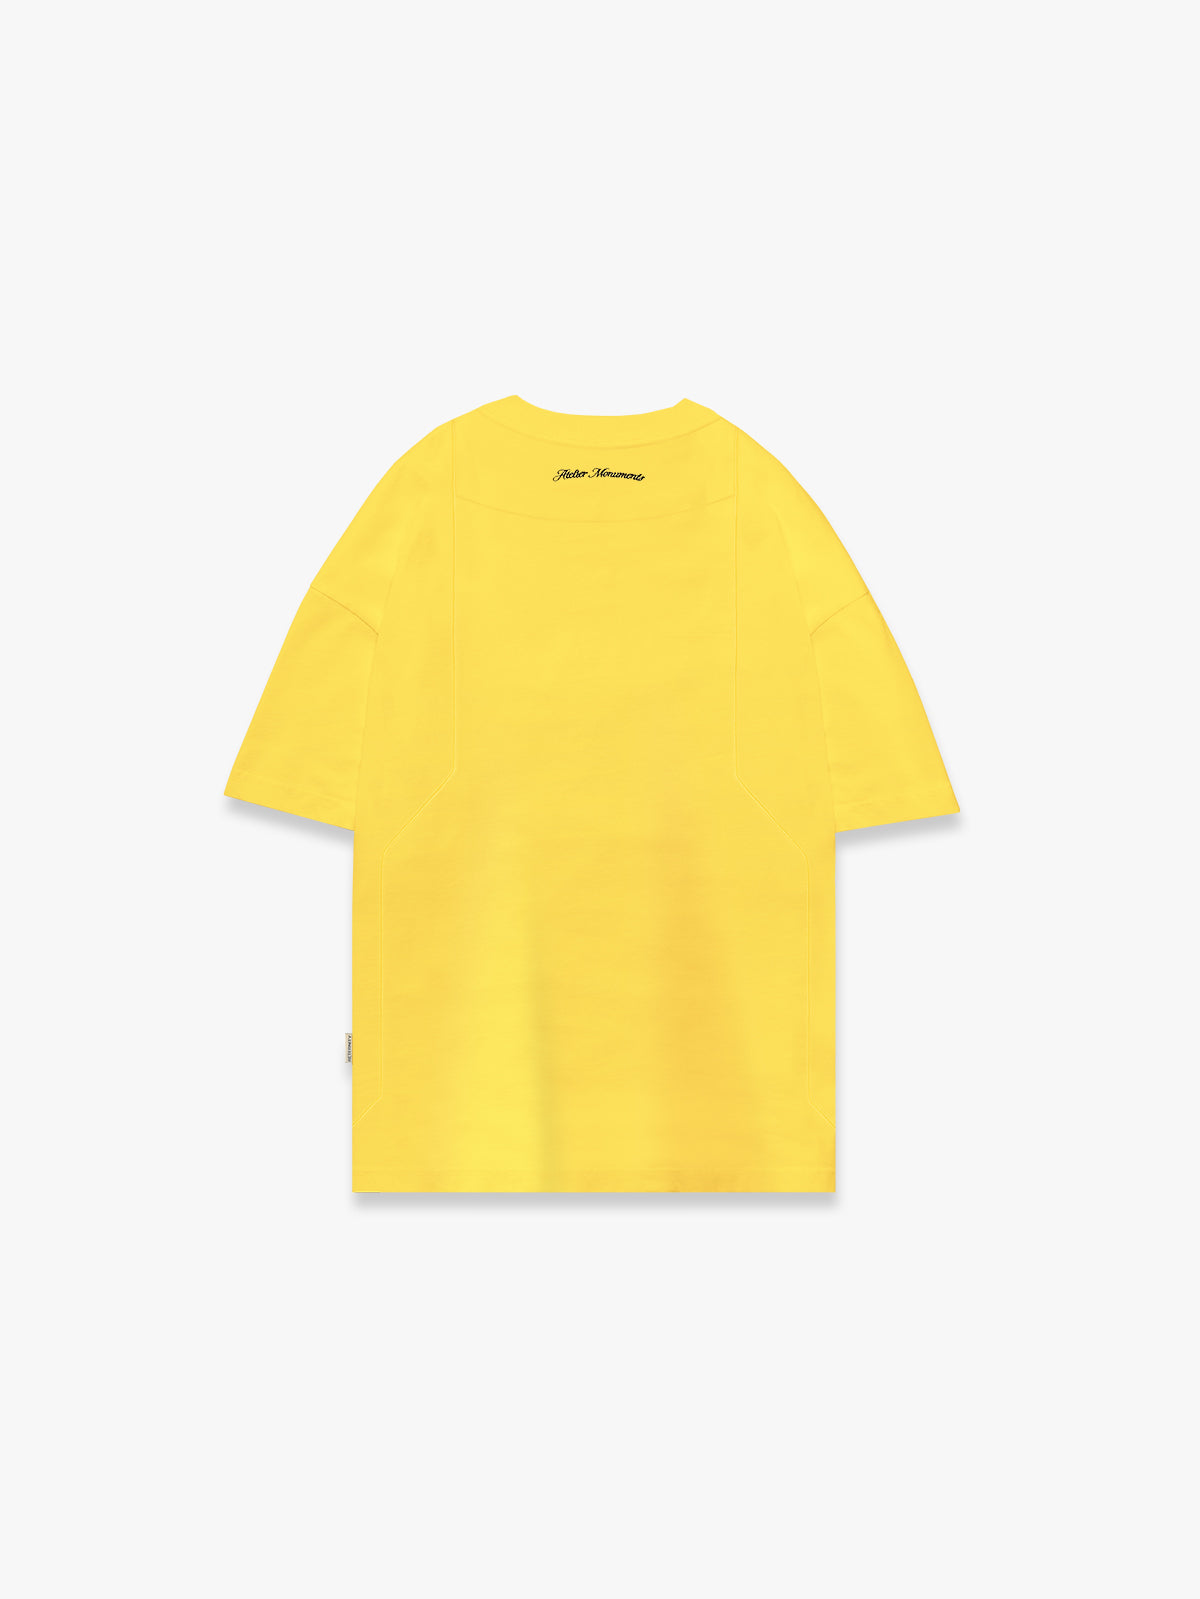 T-SHIRT ATELIER MONUMENTS - YELLOW